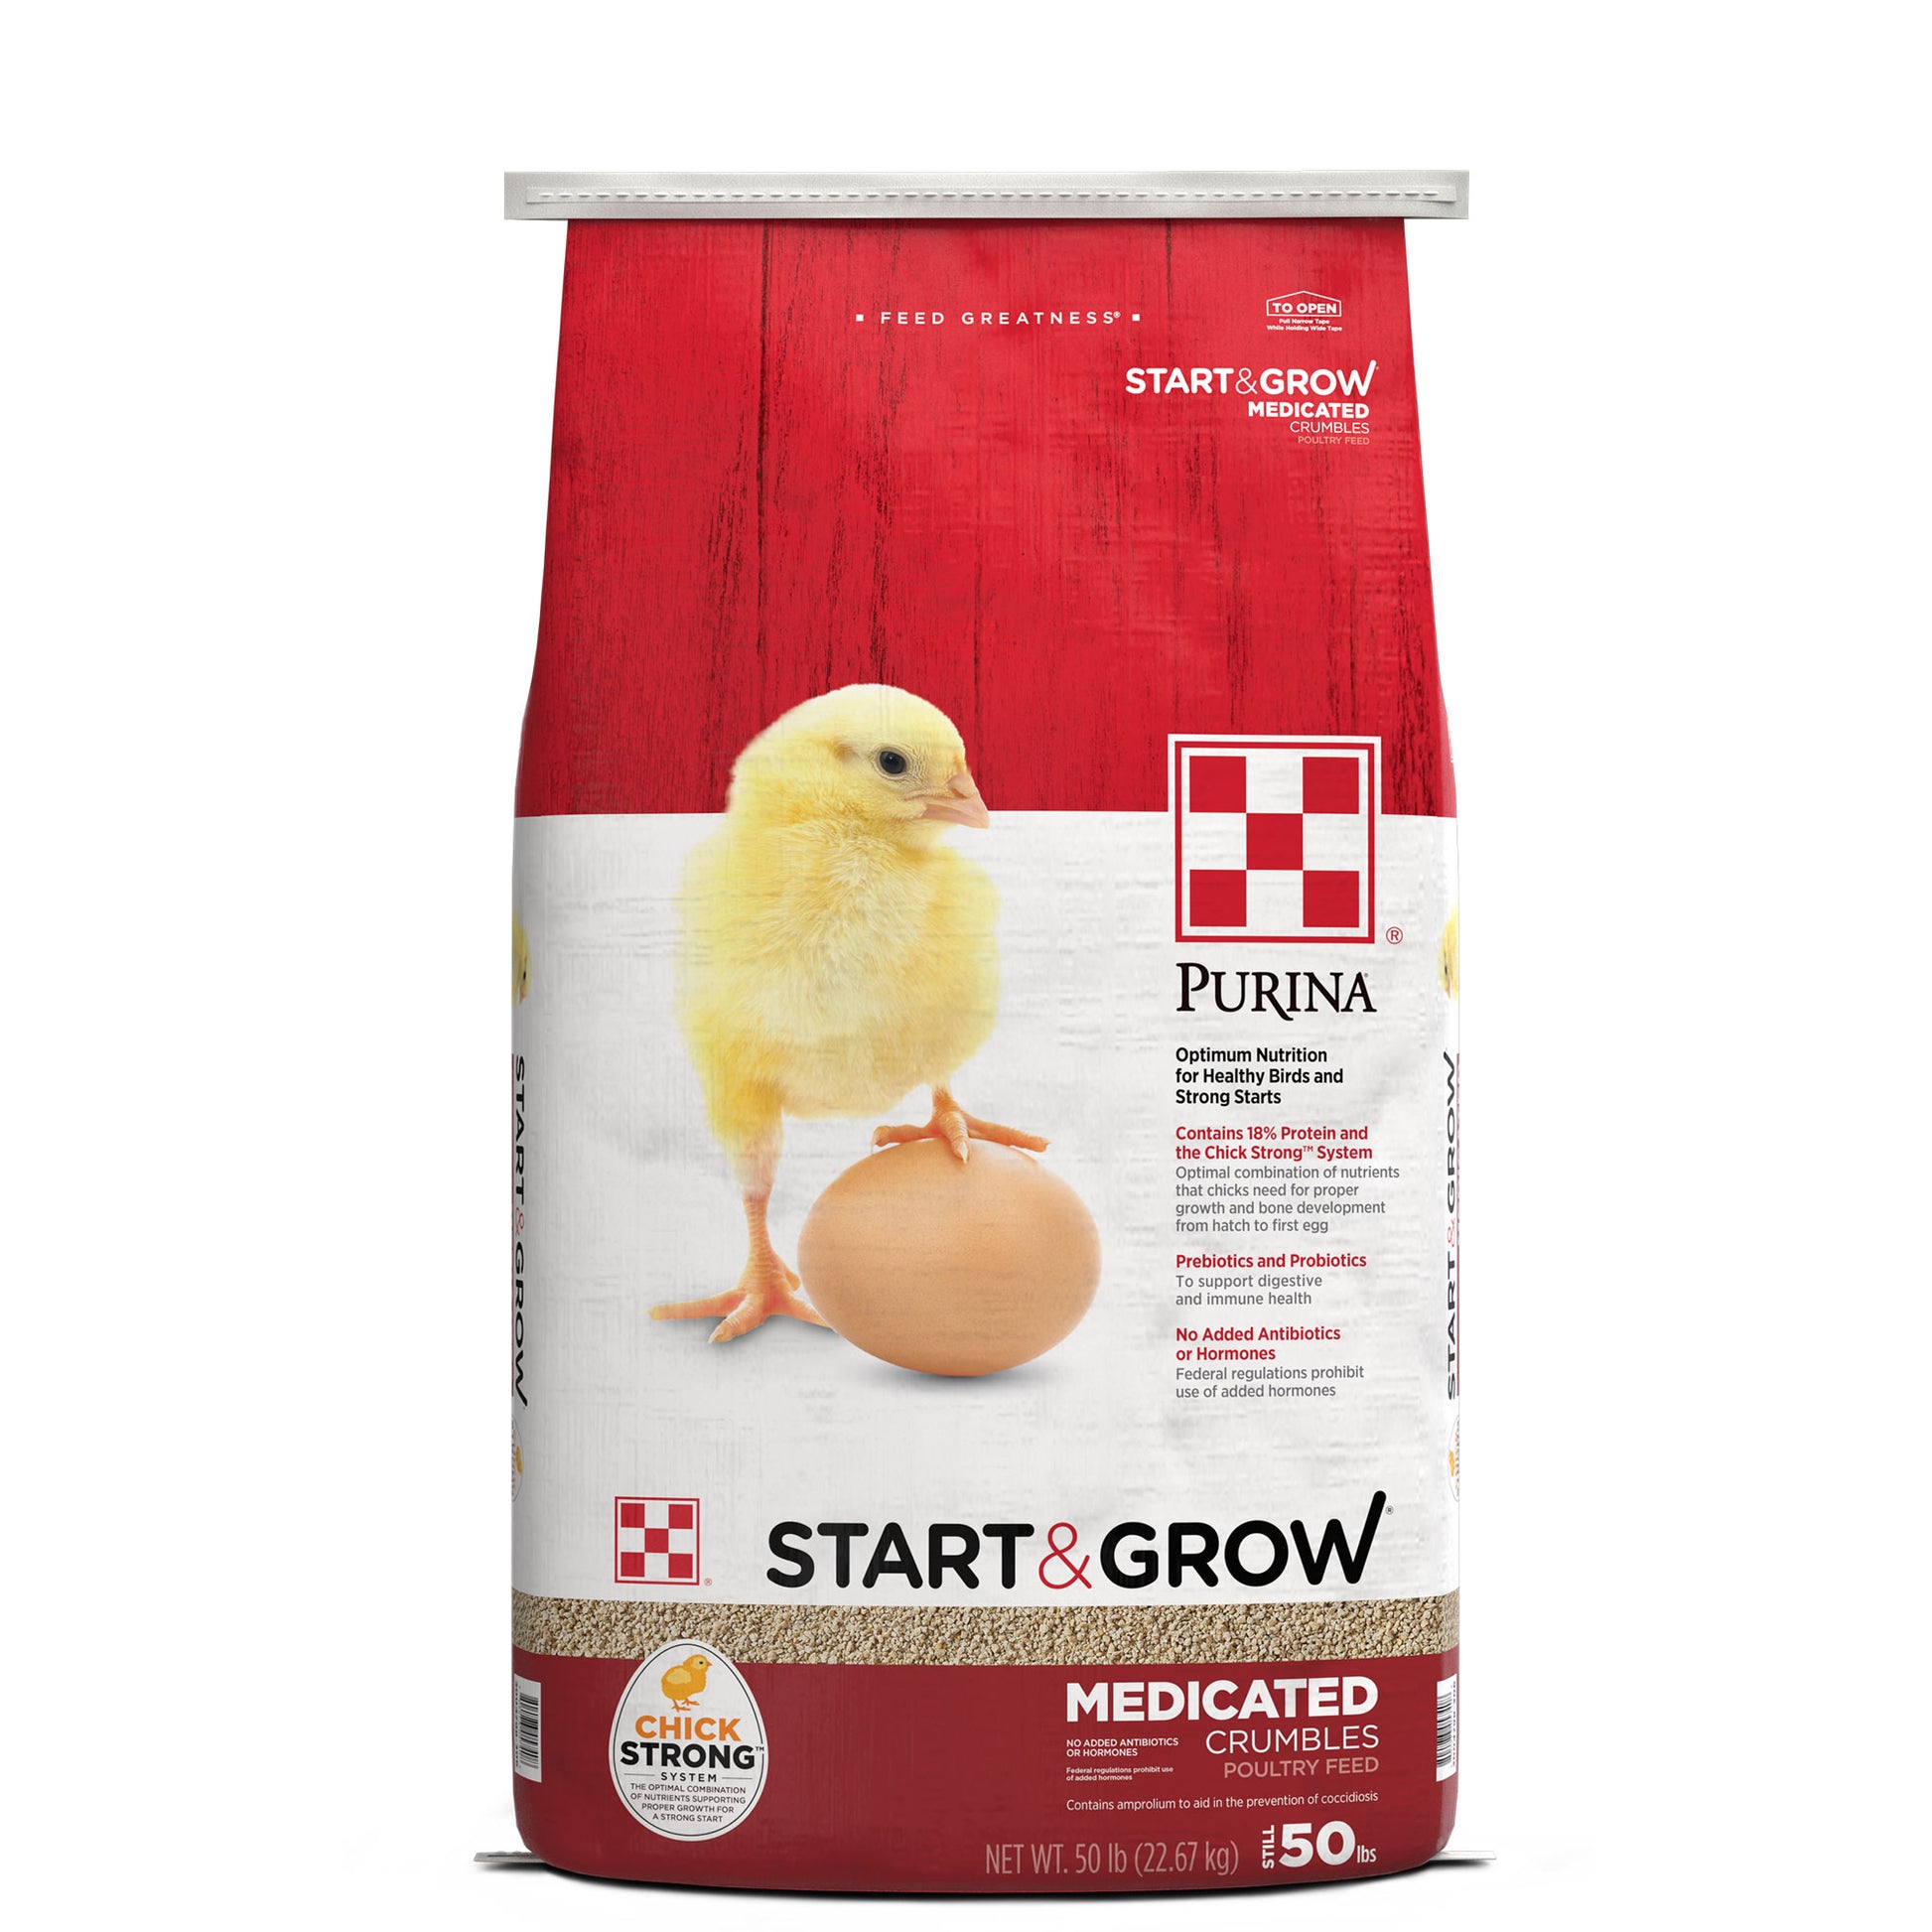 Purina Start & Grow Medicated Chicken Feed 50 Pound bag